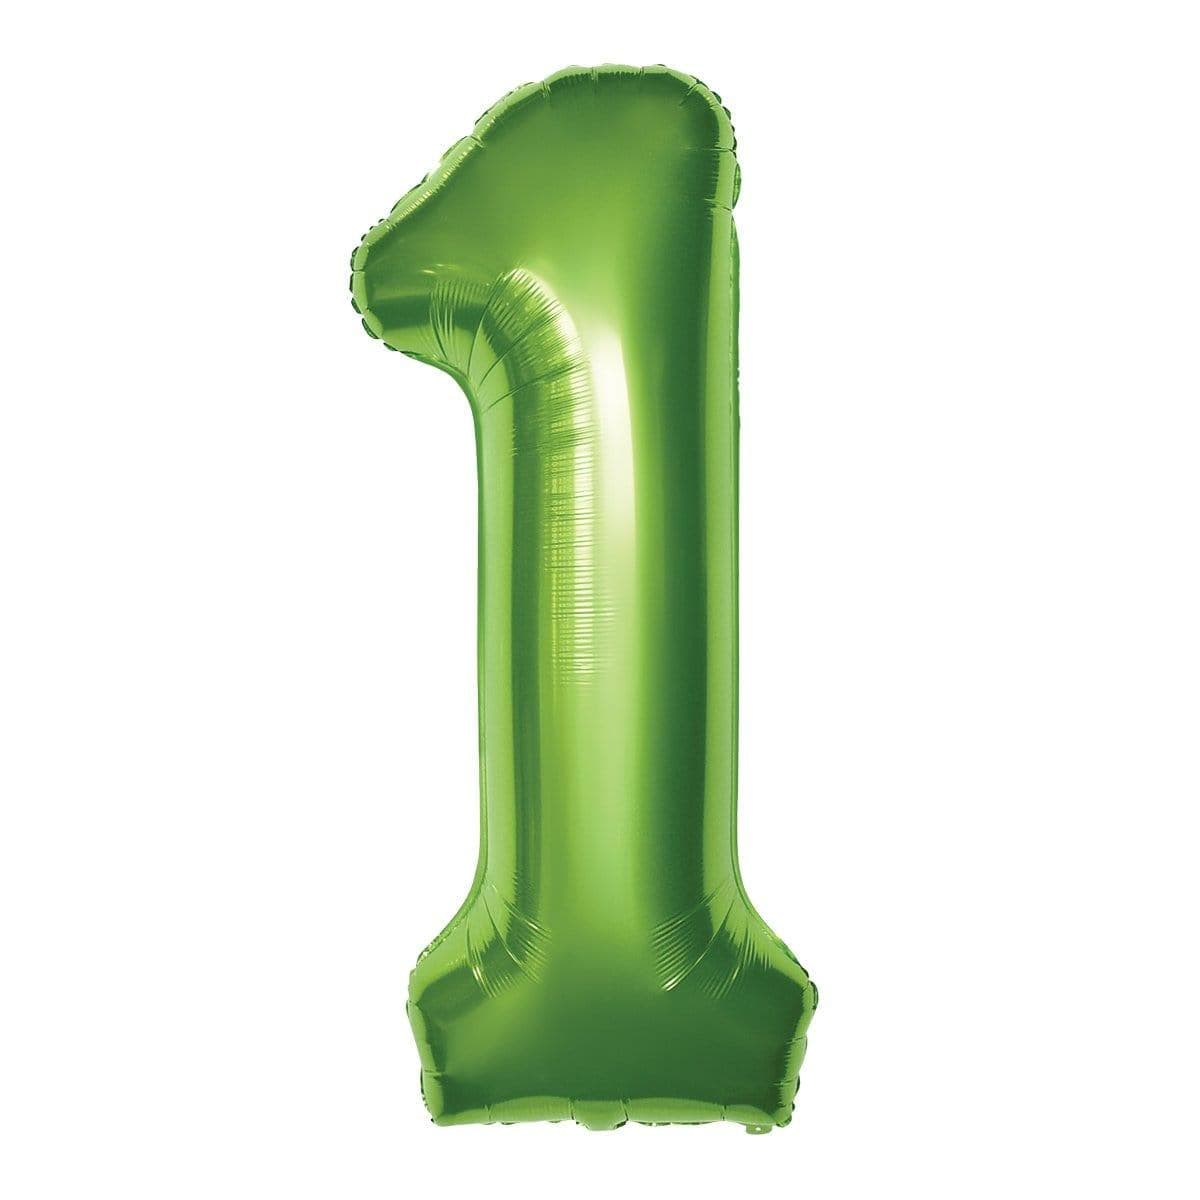 Buy Balloons Lime Green Number 1 Foil Balloon, 34 Inches sold at Party Expert